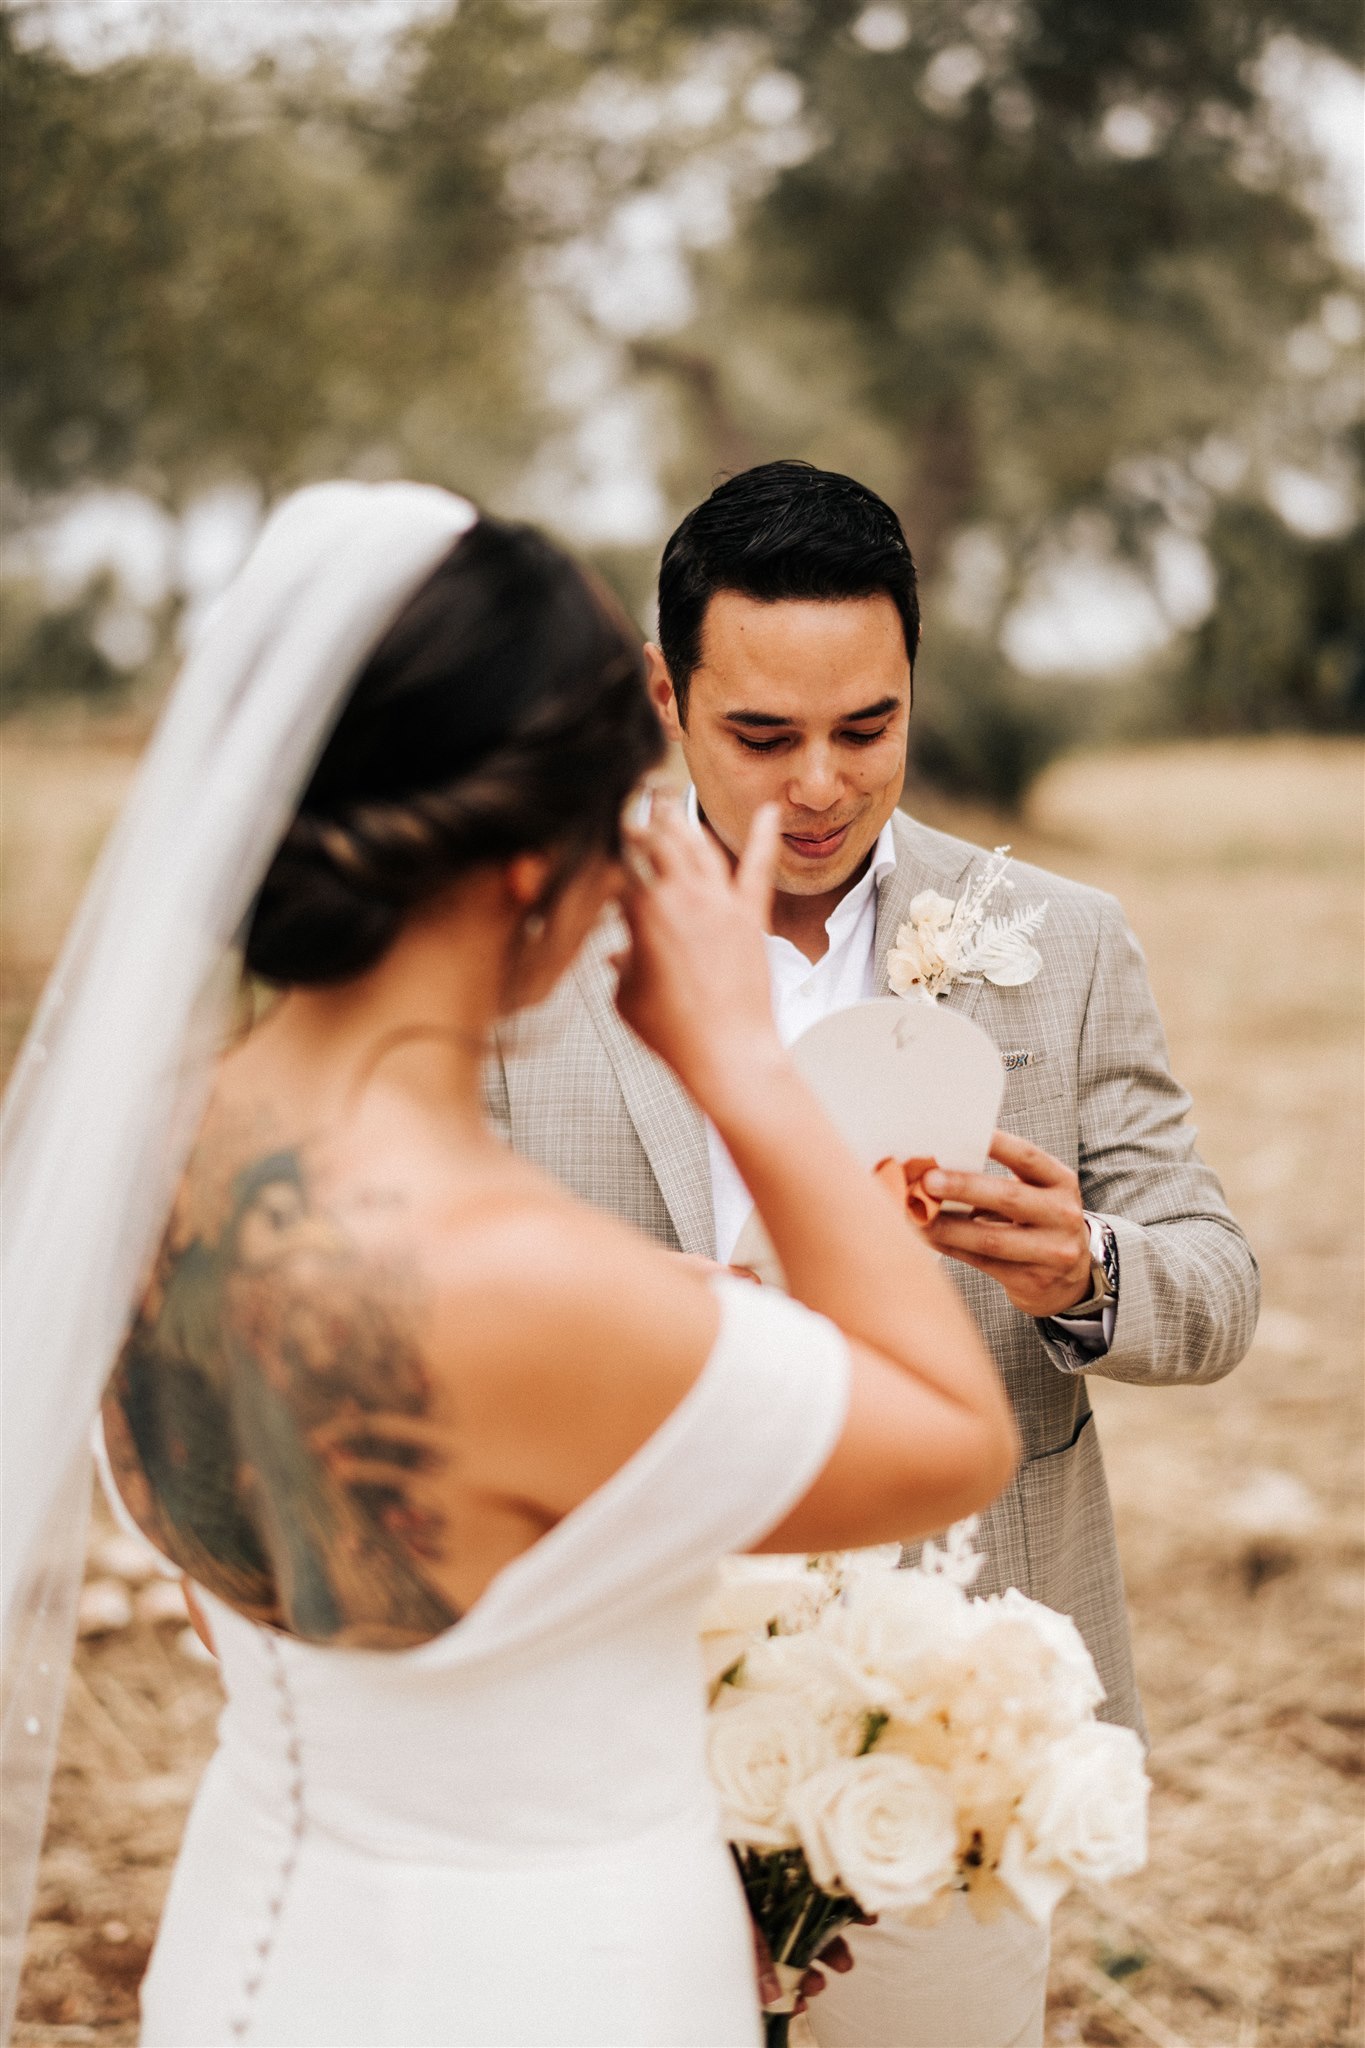 Bride and groom eloping in an olive grove in Ostuni, Puglia. The bride is crying while the groom is reading the vows